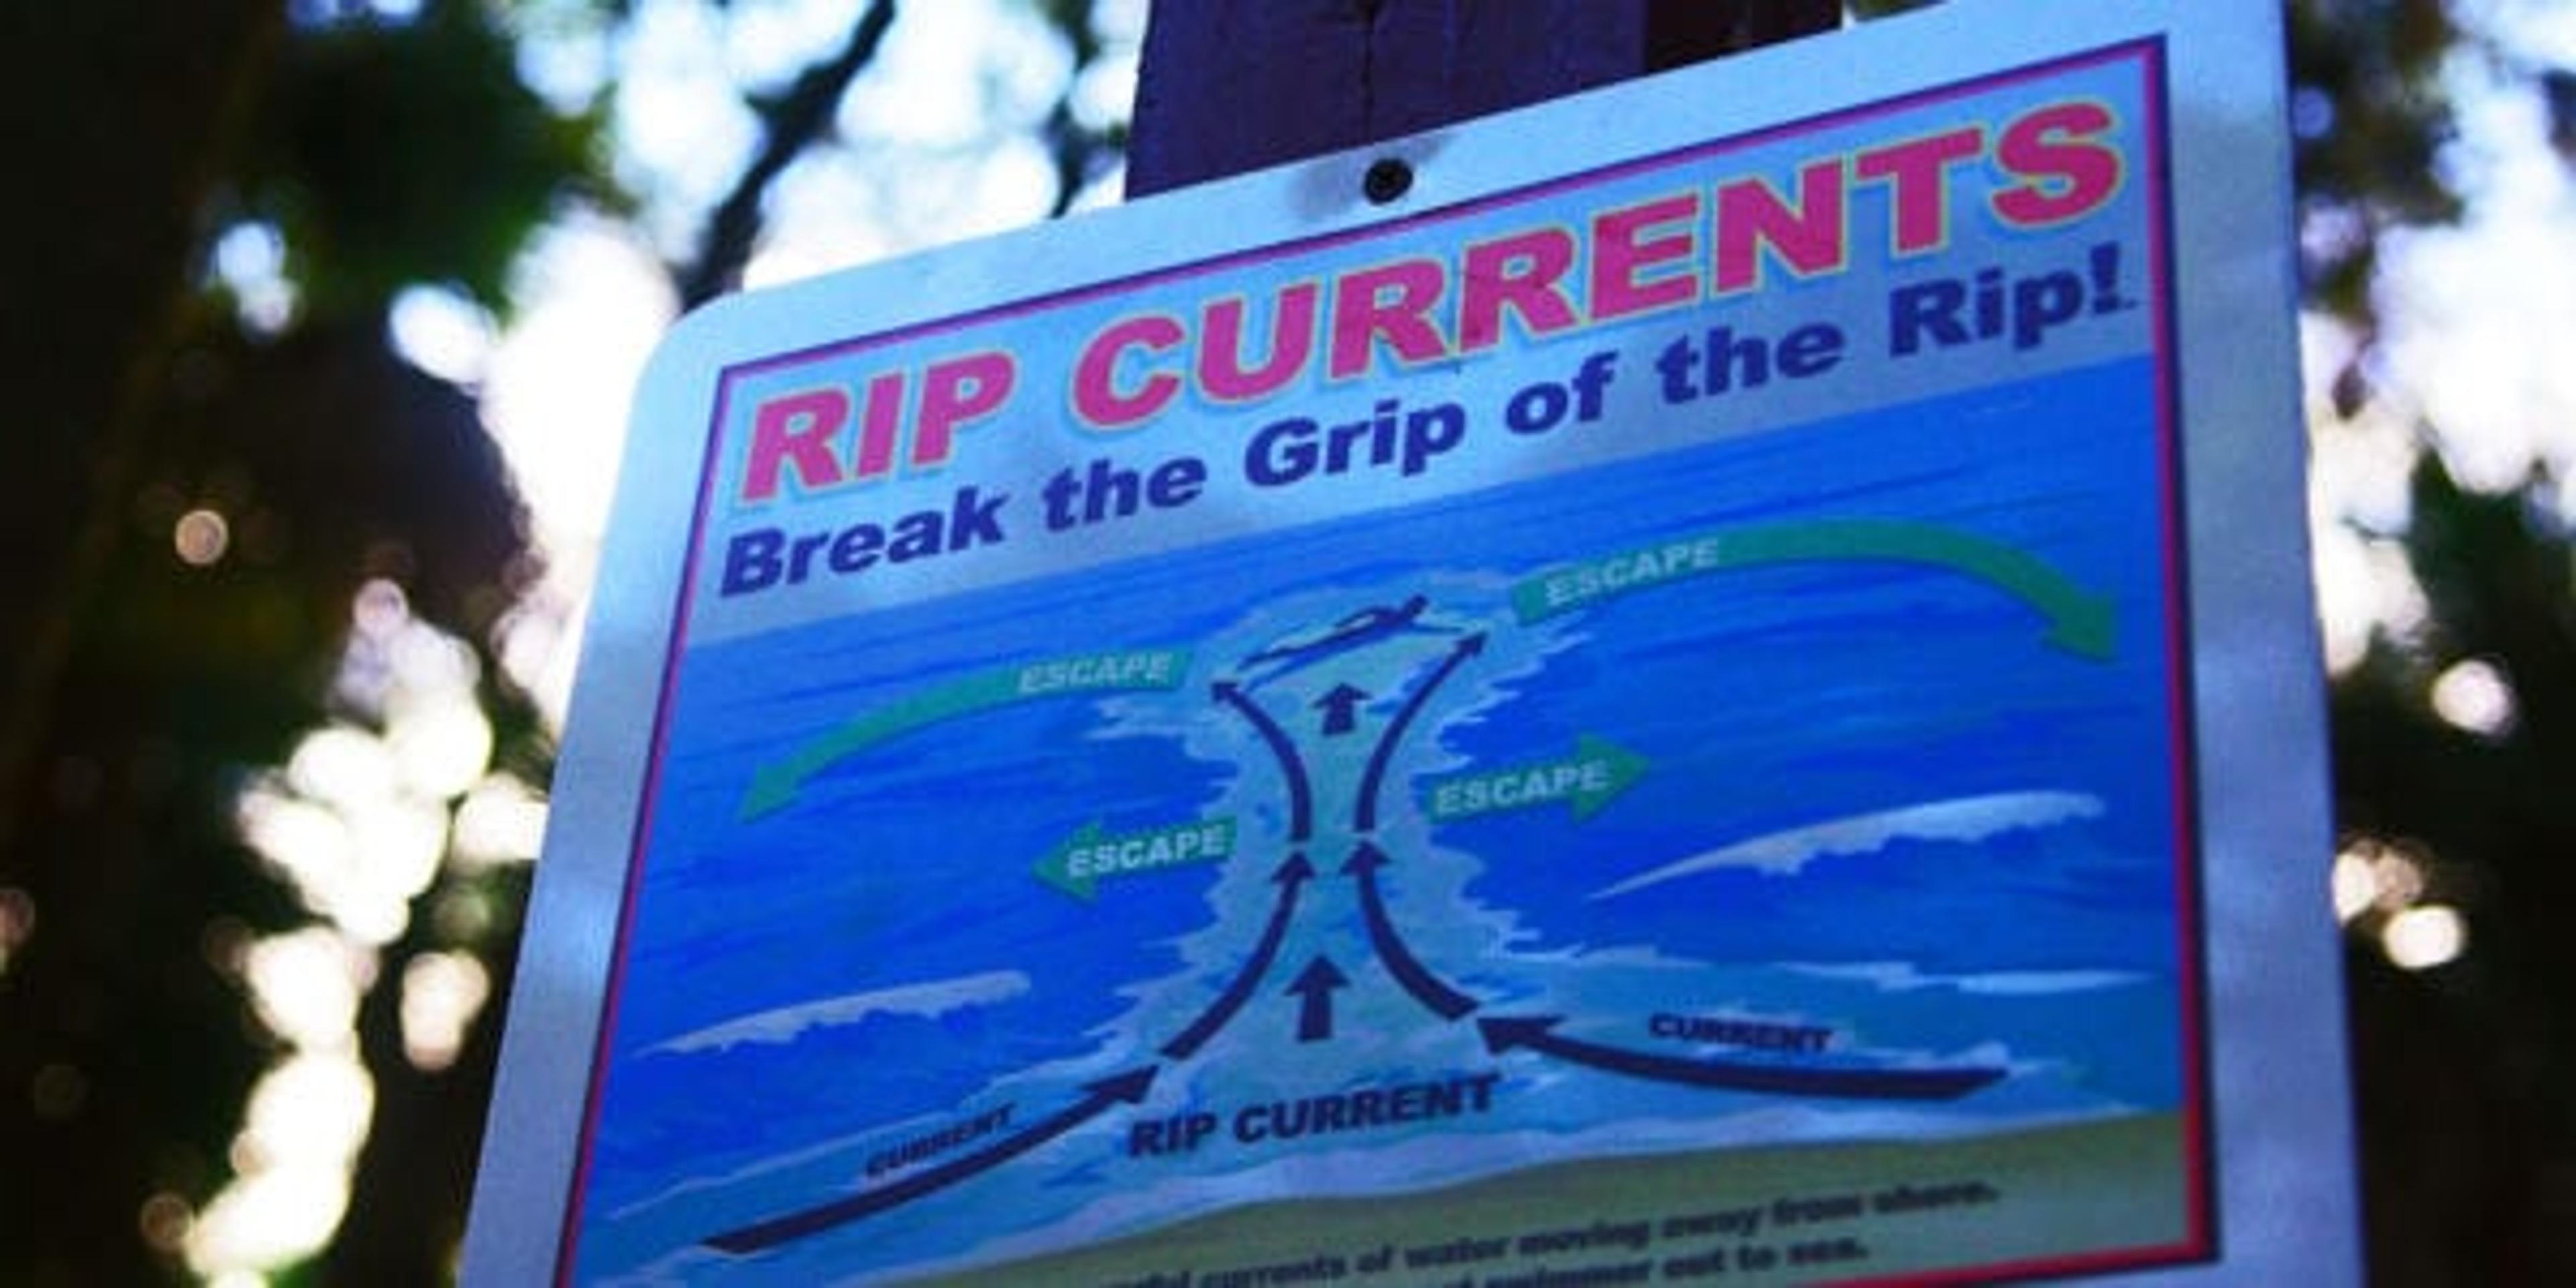 A sign about rip currents